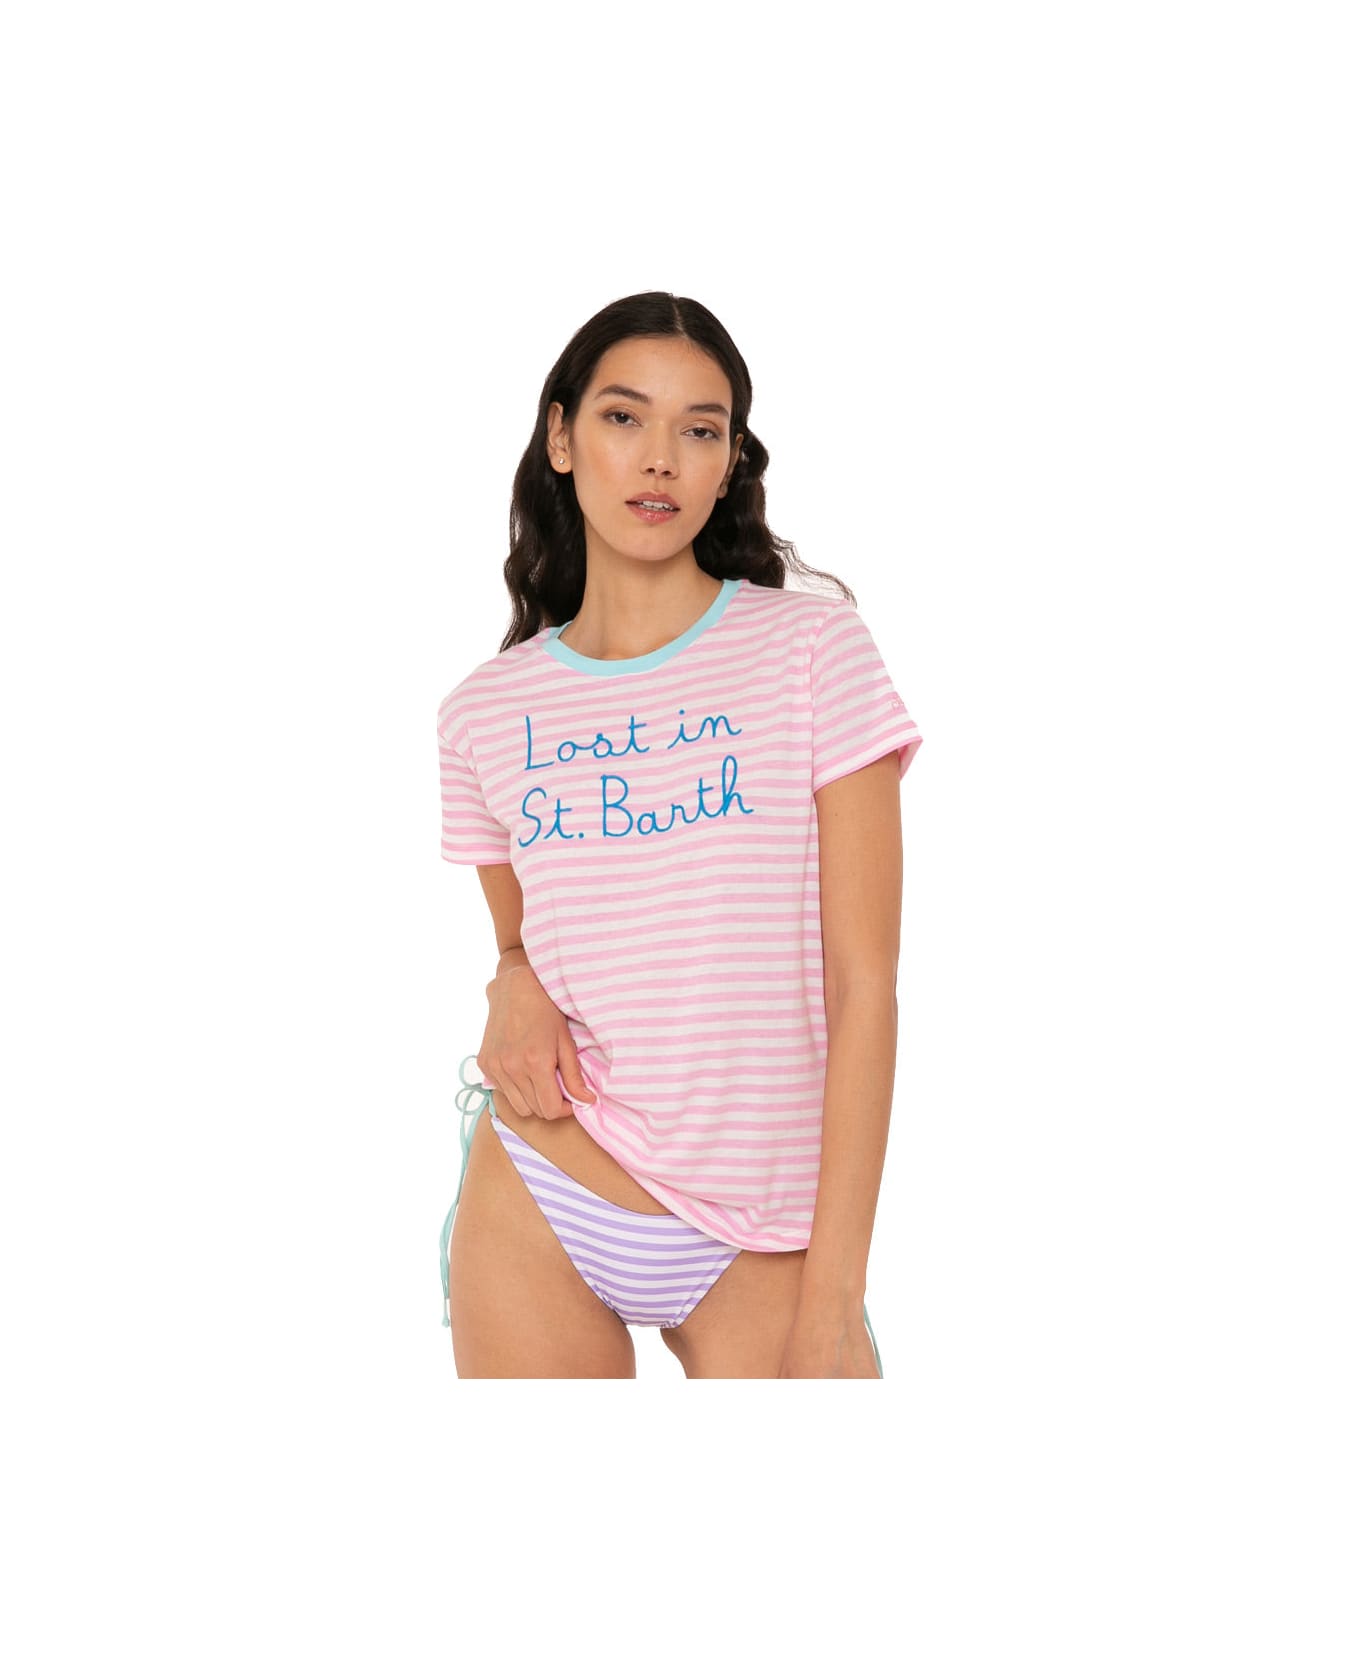 MC2 Saint Barth Striped T-shirt With Lost In St. Barth Embroidery - PINK ボディスーツ